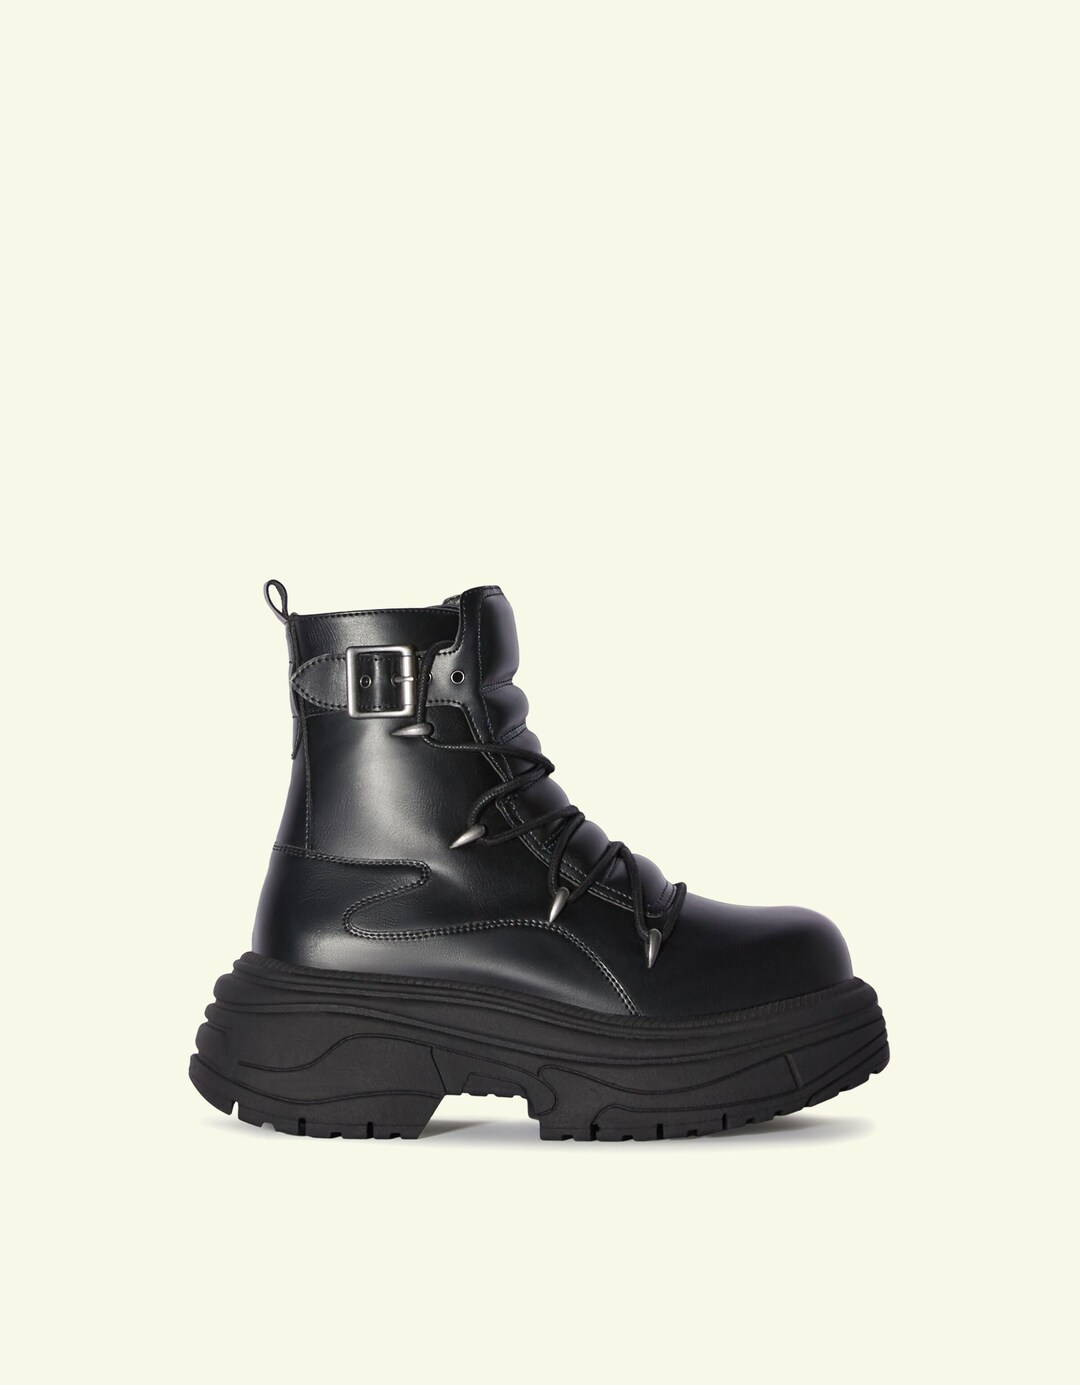 Men's chunky boots with buckles